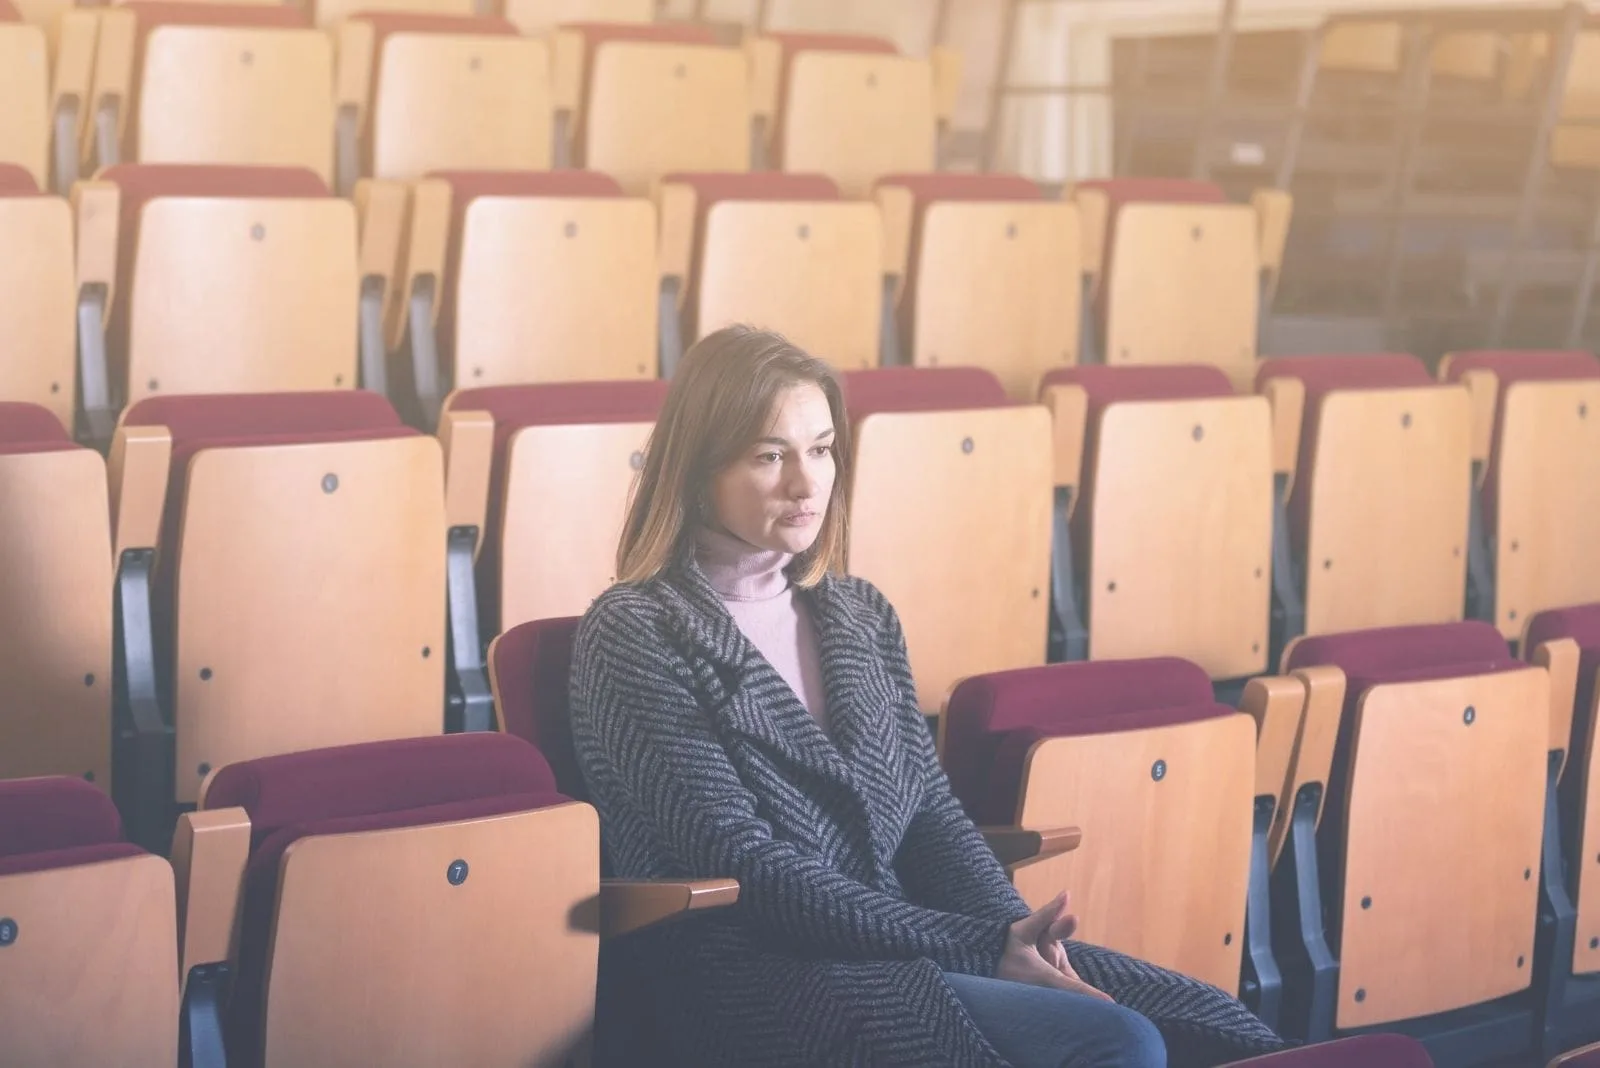 woman in the movie house alone waiting and pensive with empty seats